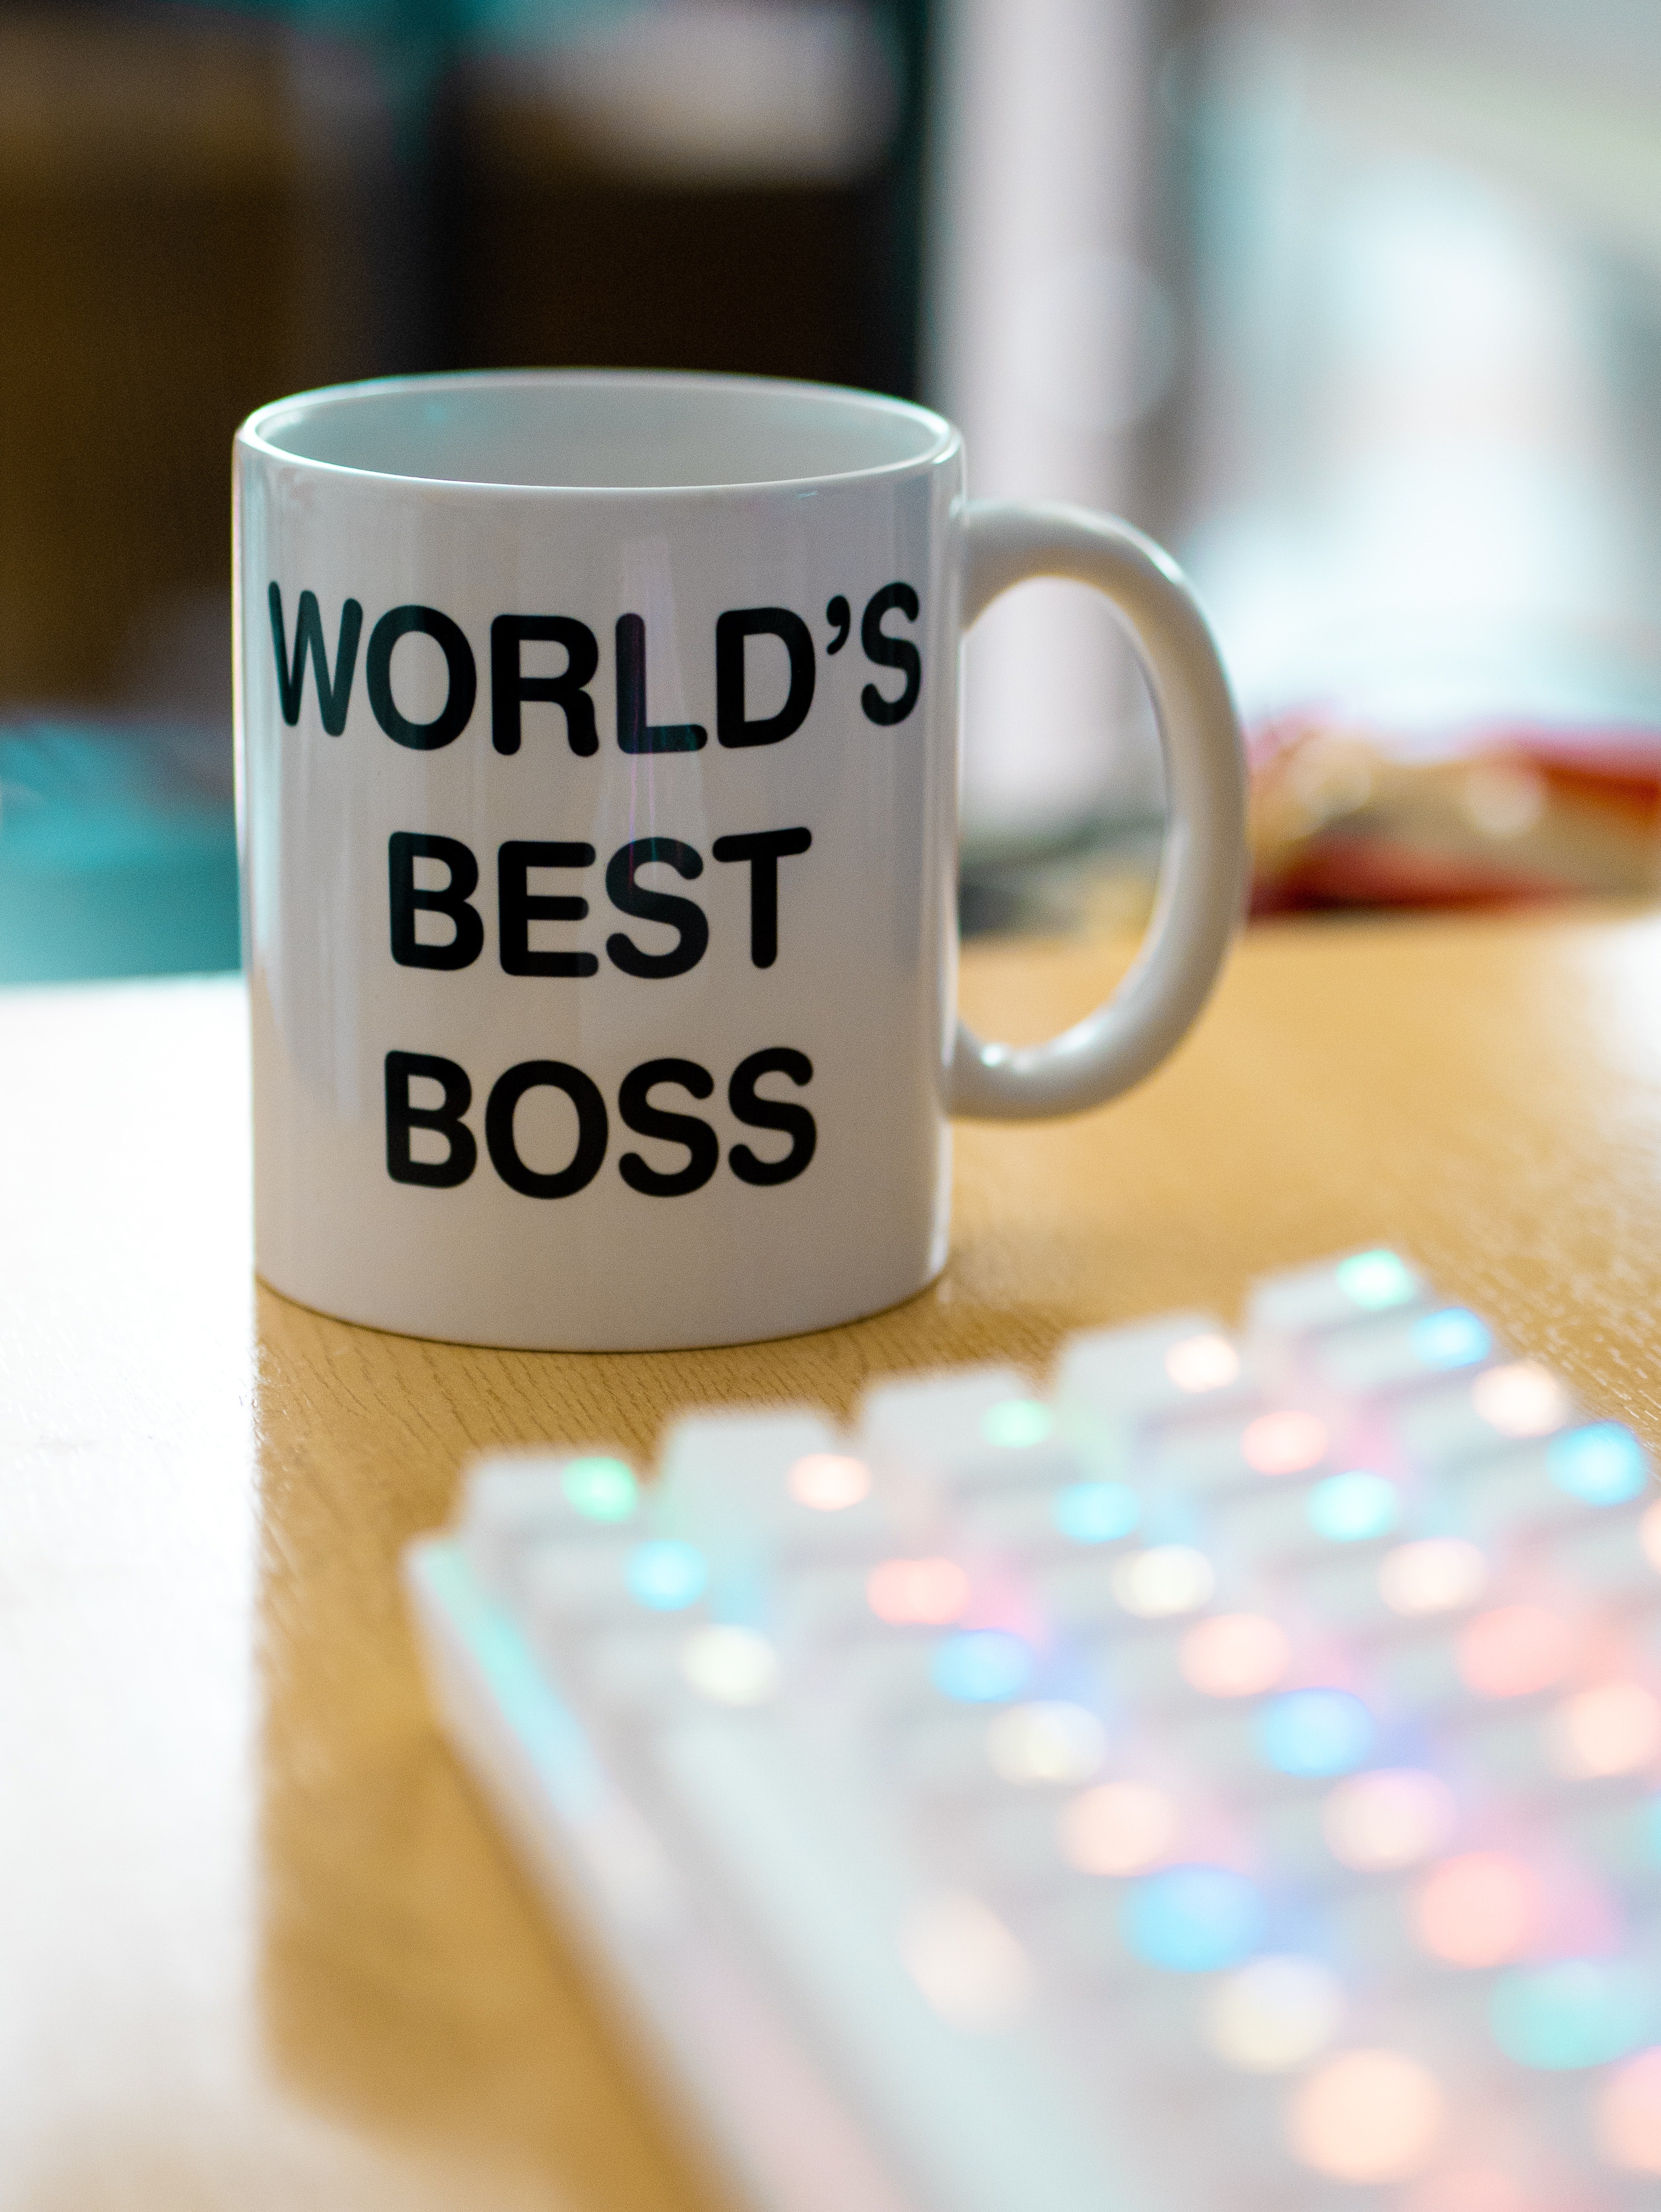 A mug with the words "world's best boss" on it.